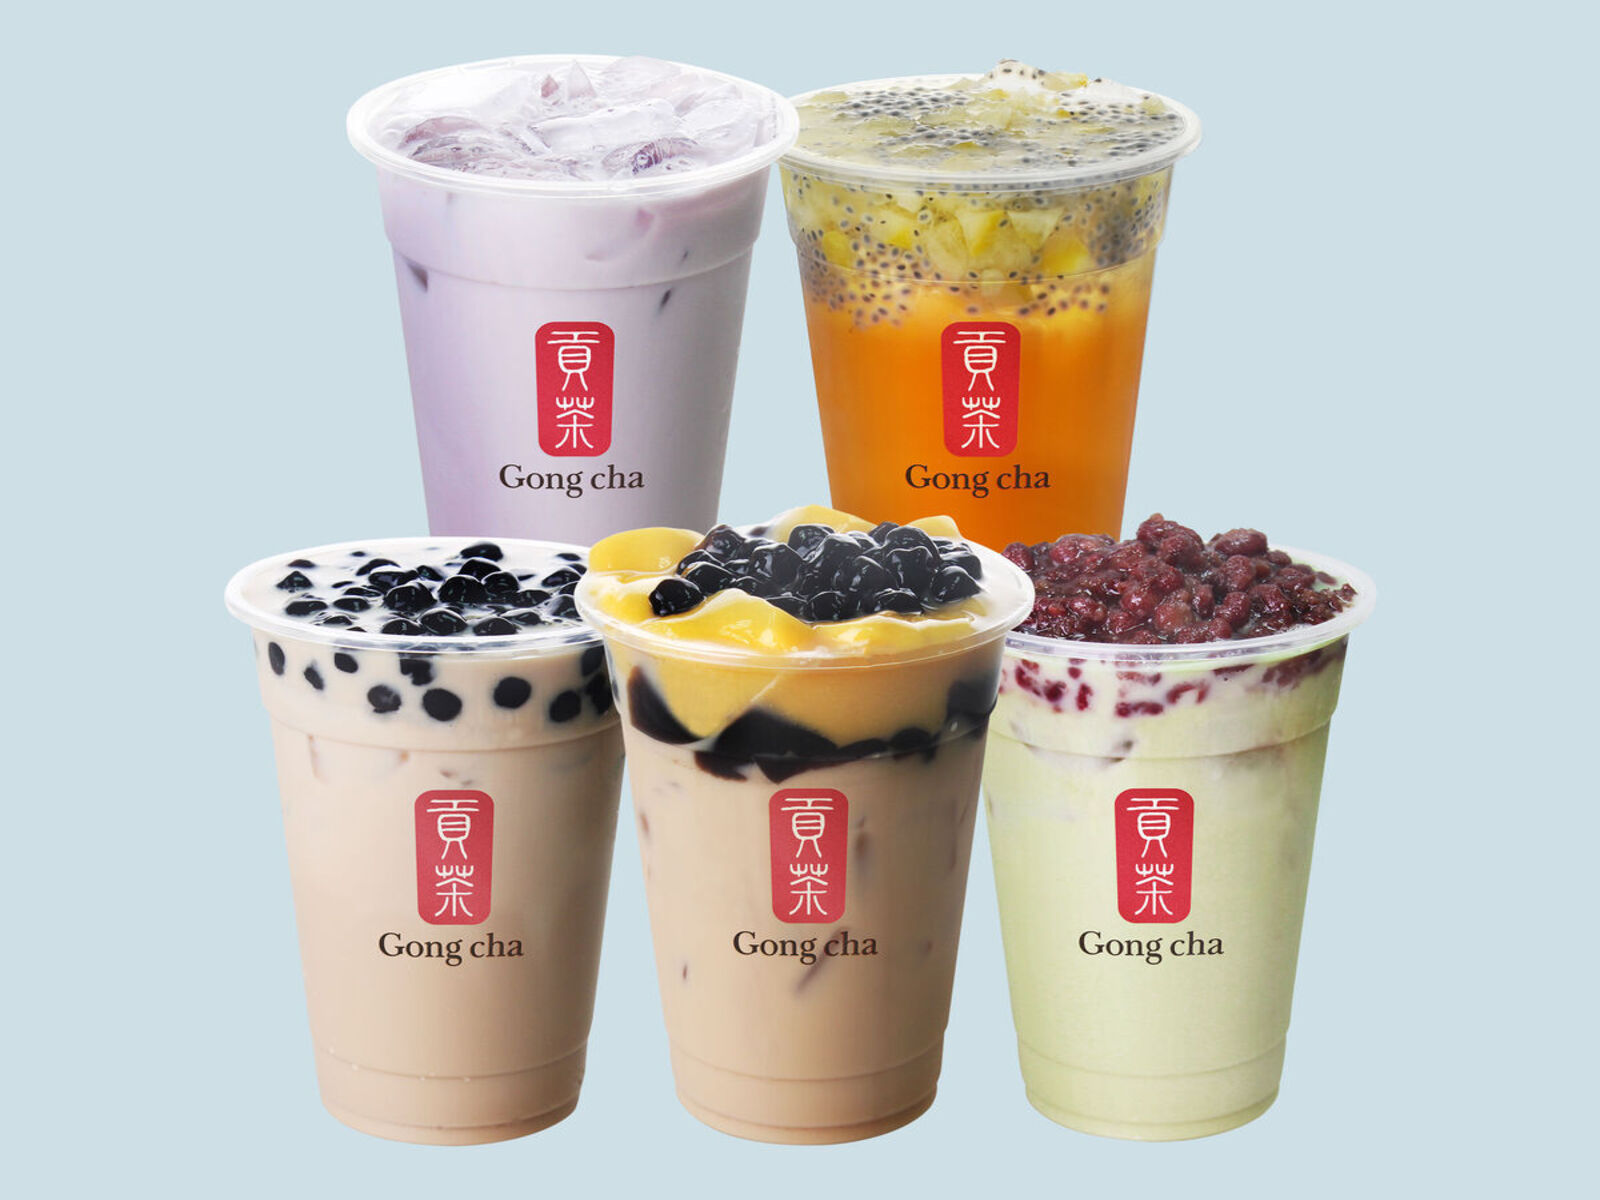 19-gong-cha-nutrition-facts